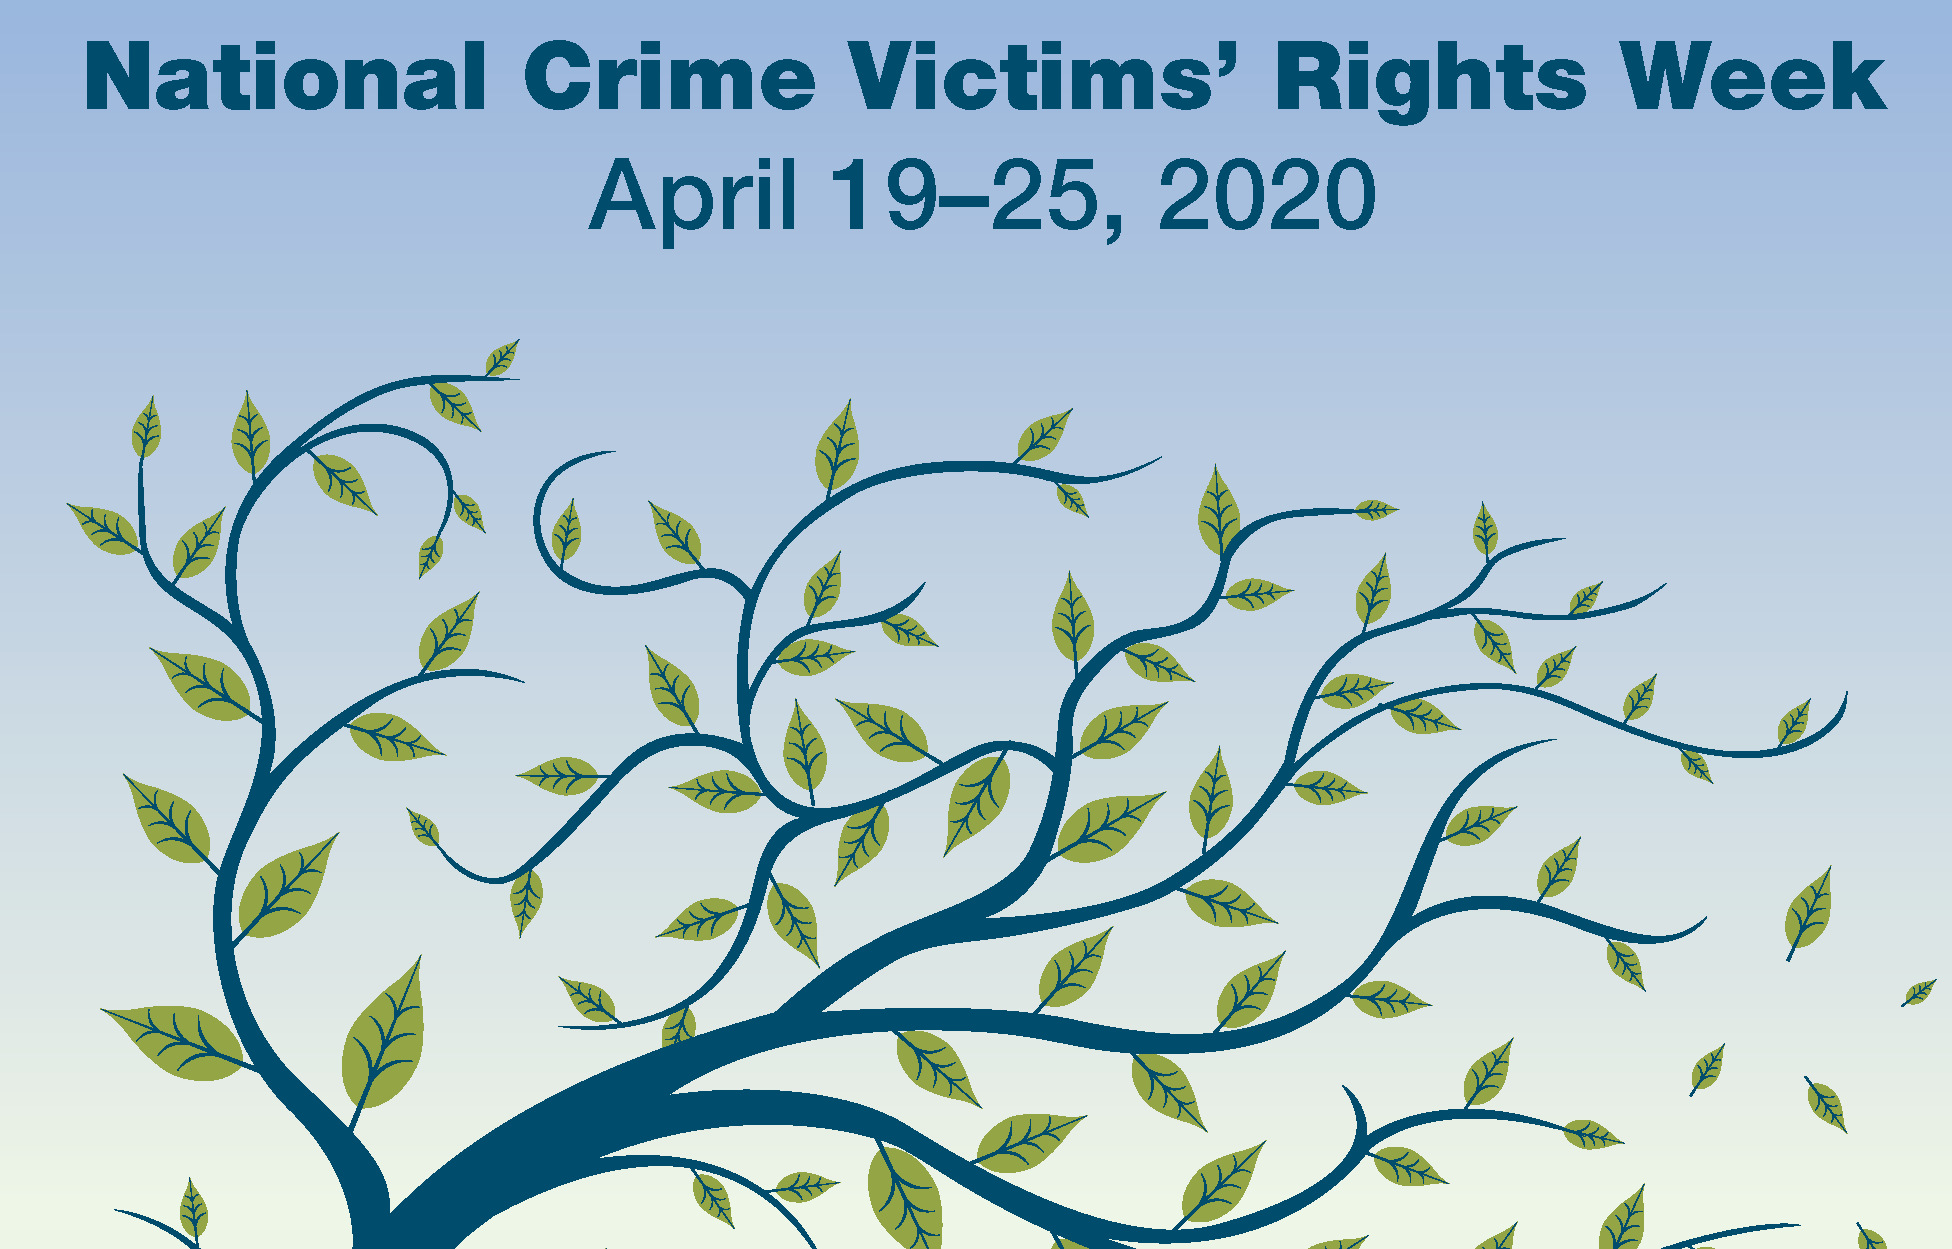 Seeking justice, inspiring hope, sharing stories for 2020 ‘Crime Victims’ Rights Week’